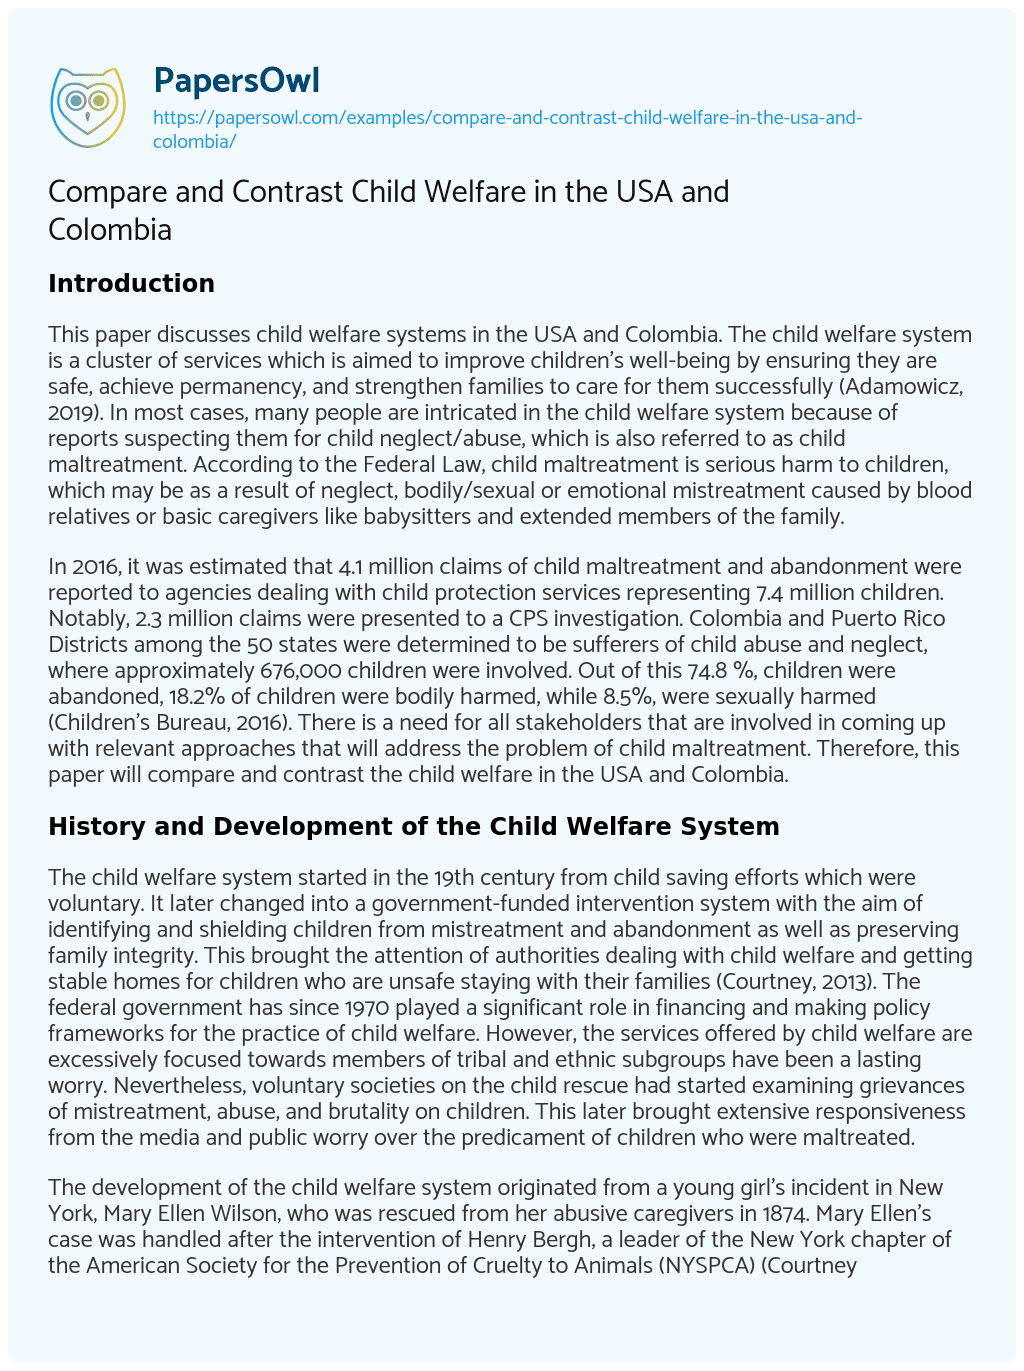 Essay on Compare and Contrast Child Welfare in the USA and Colombia